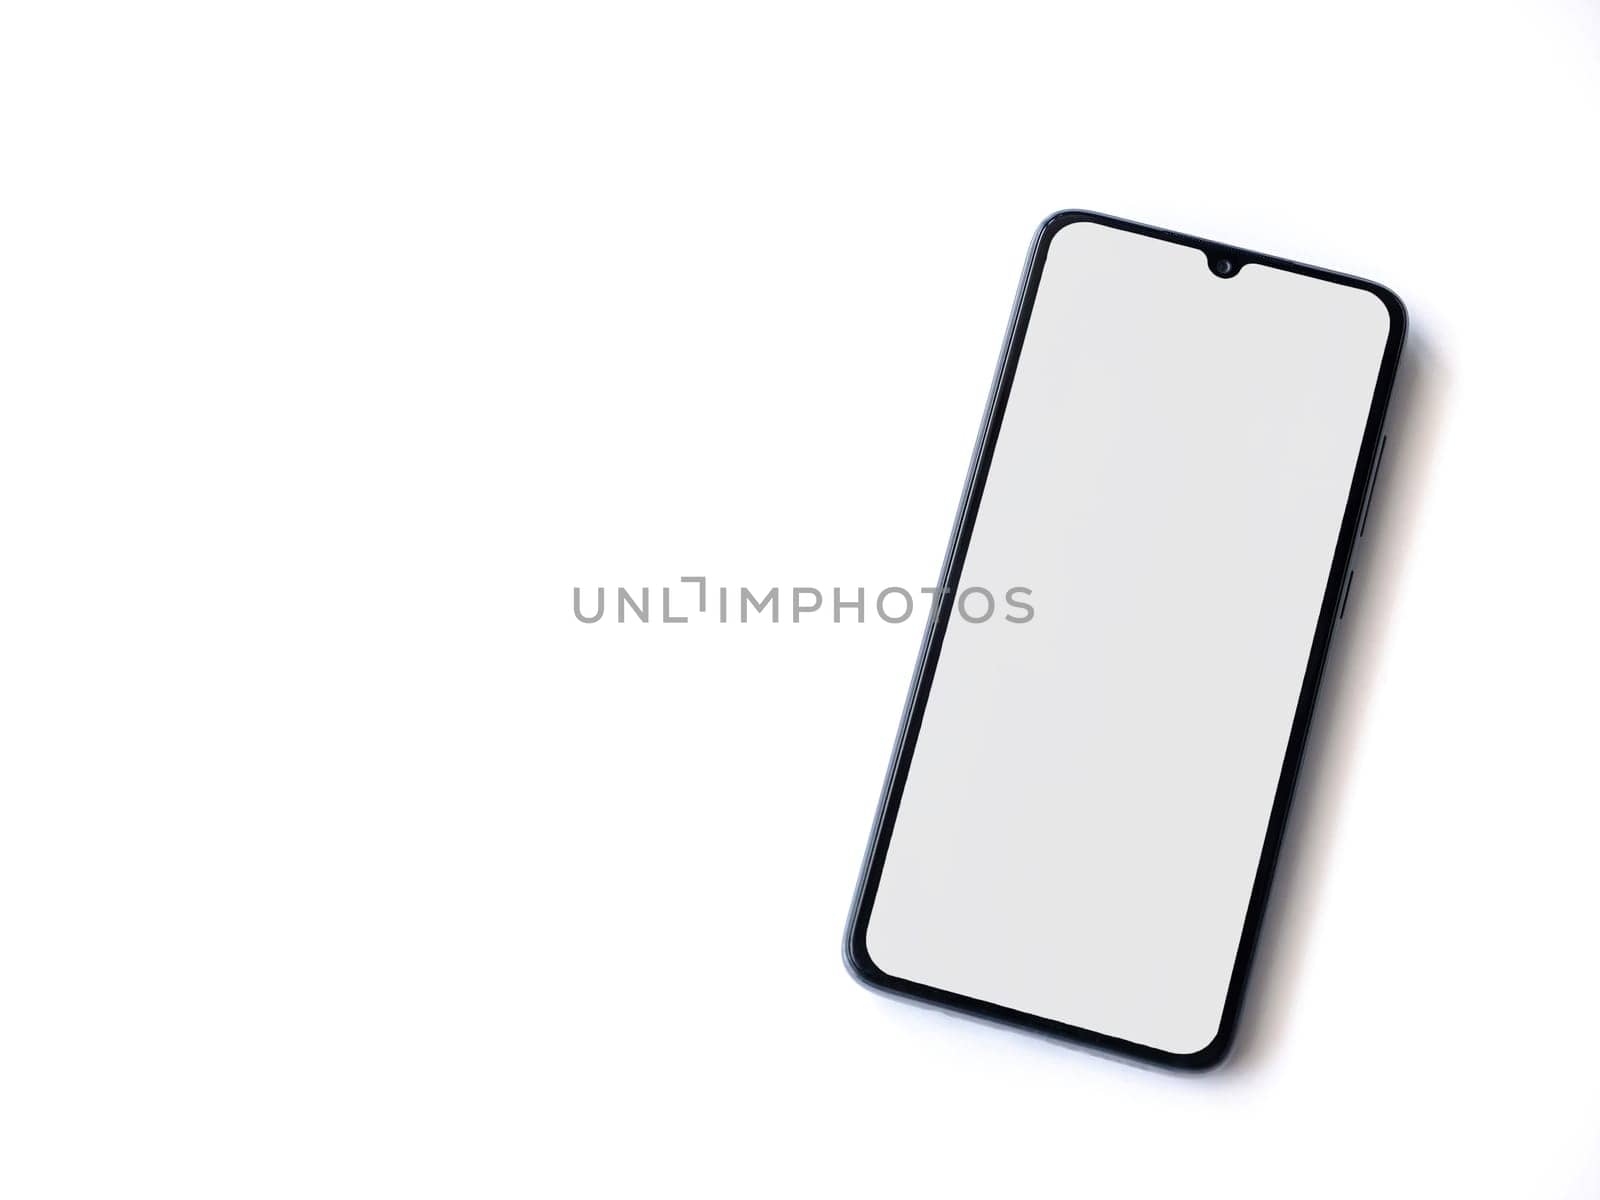 Black mobile smartphone mockup lies on the surface with blank screen isolated on white background. Top view flat lay with copy space.